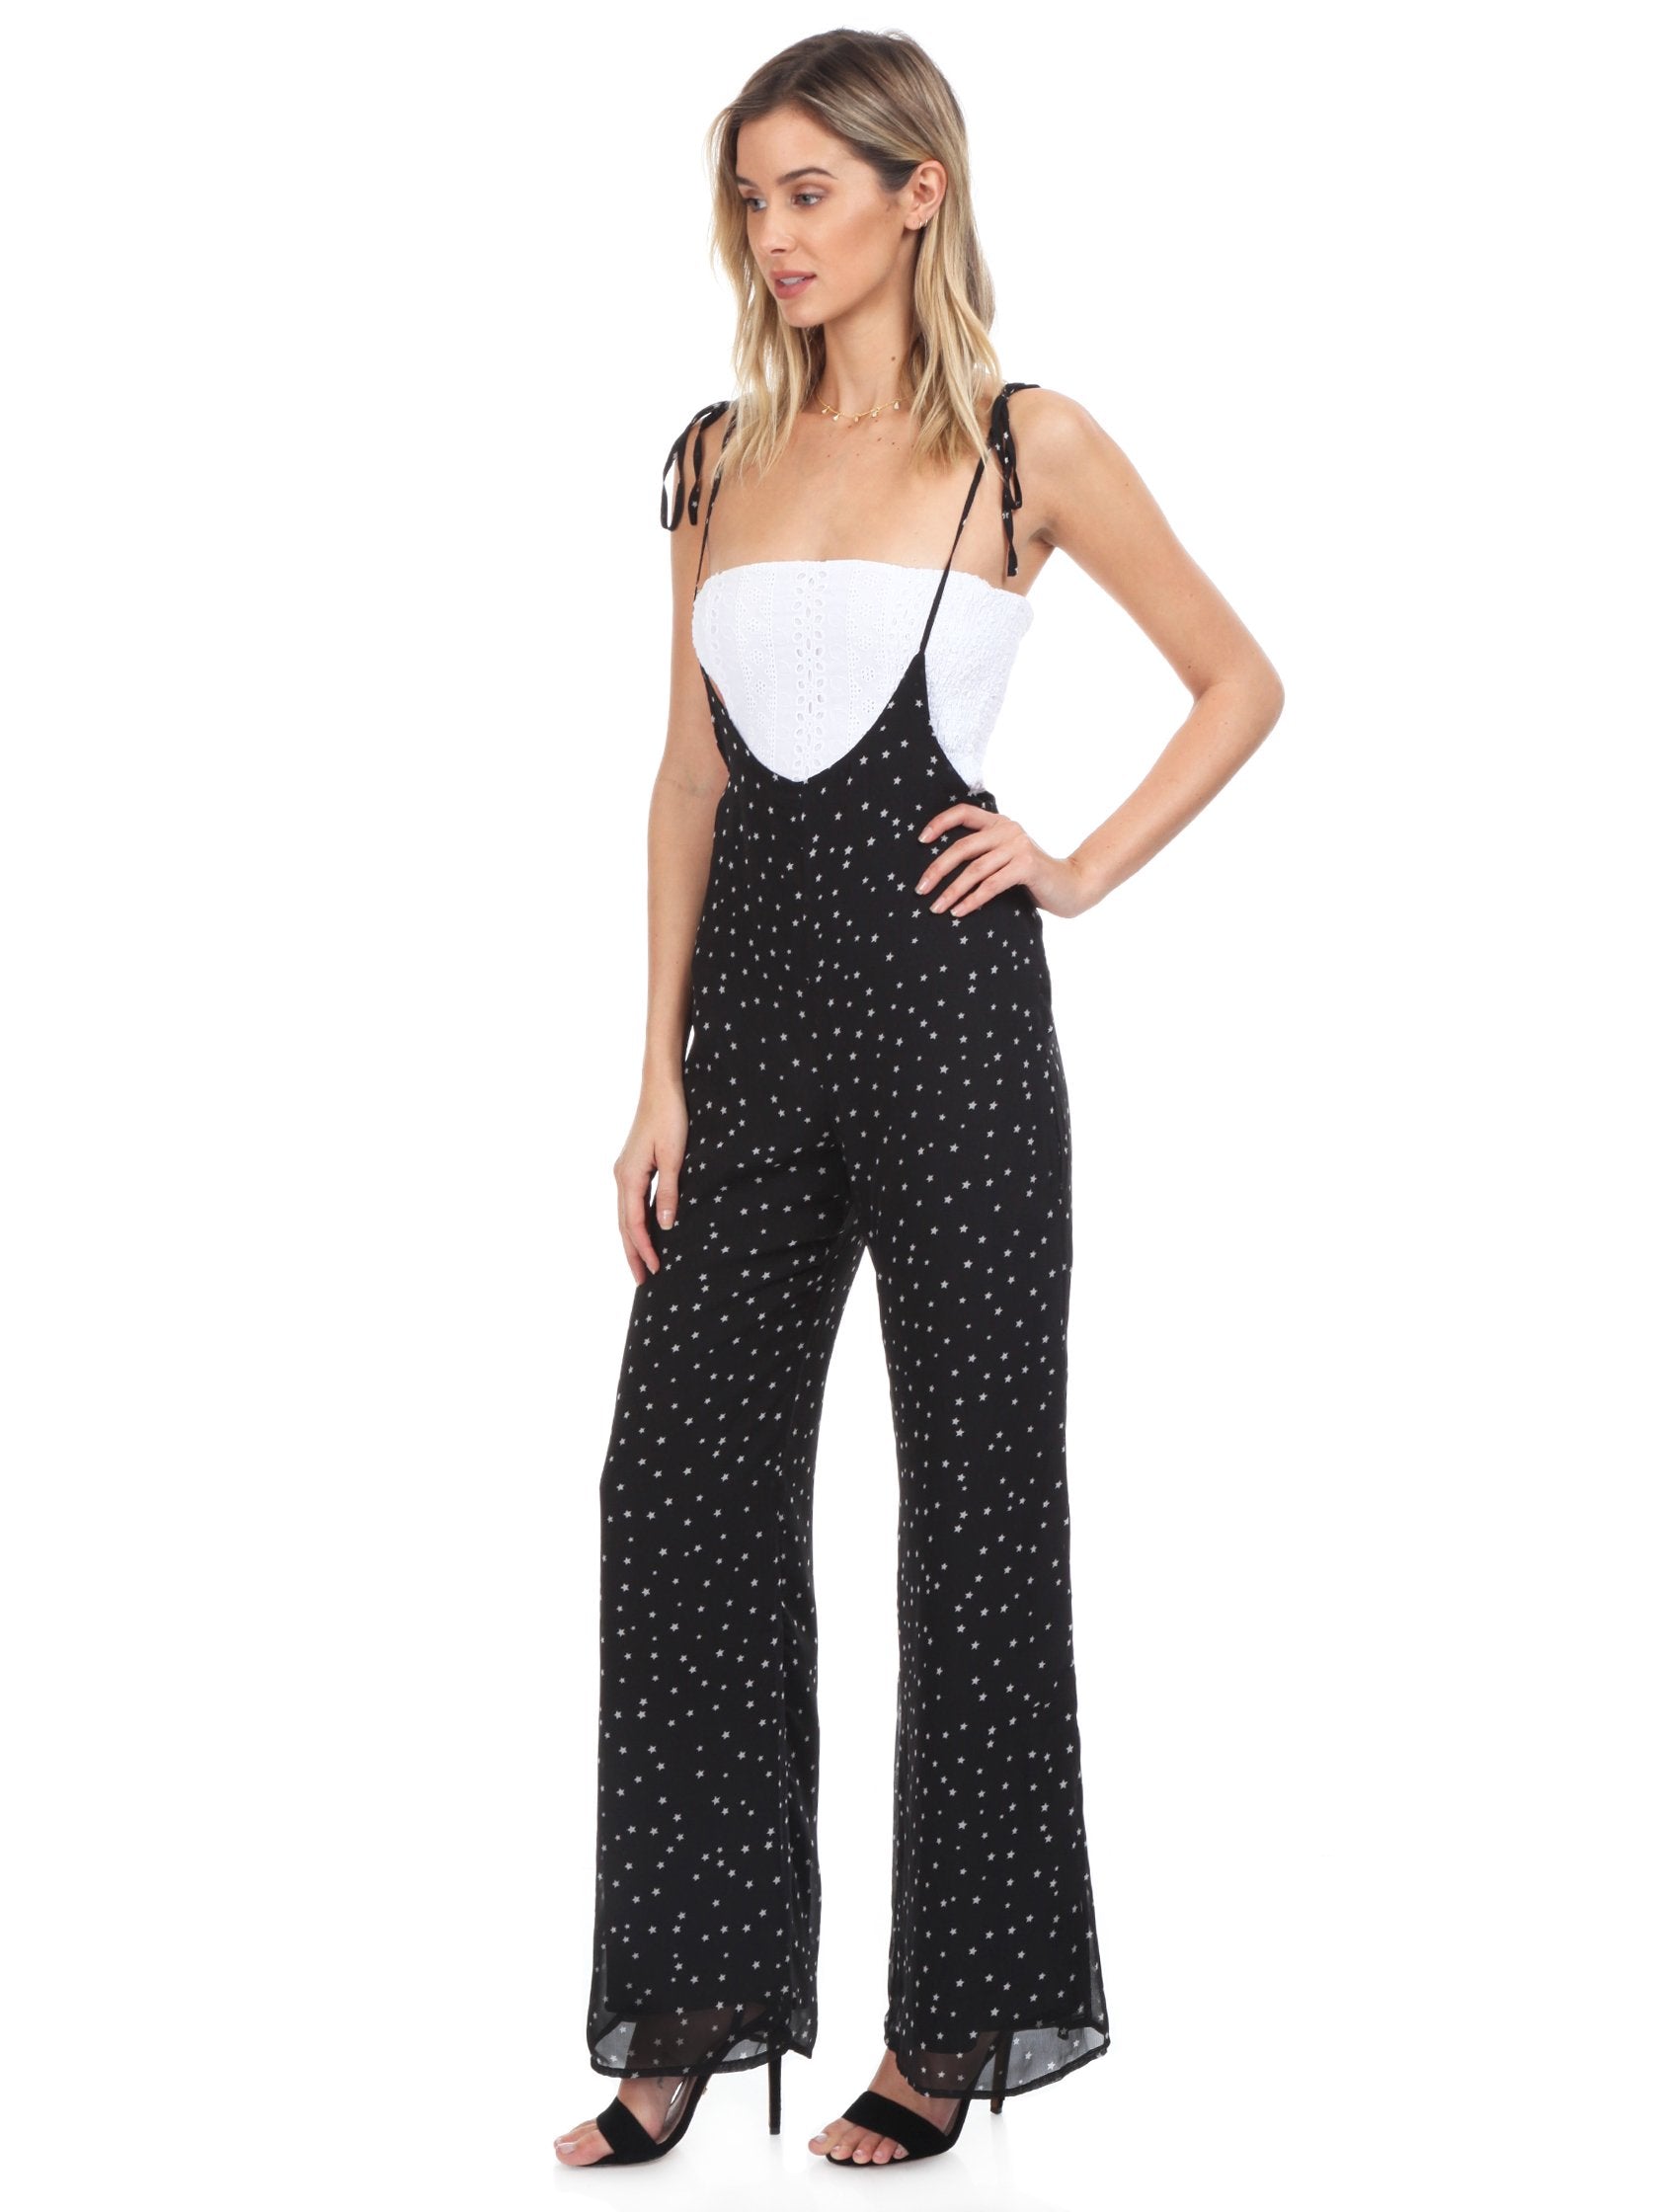 Woman wearing a jumpsuit rental from FashionPass called Sasha Star Print Jumpsuit